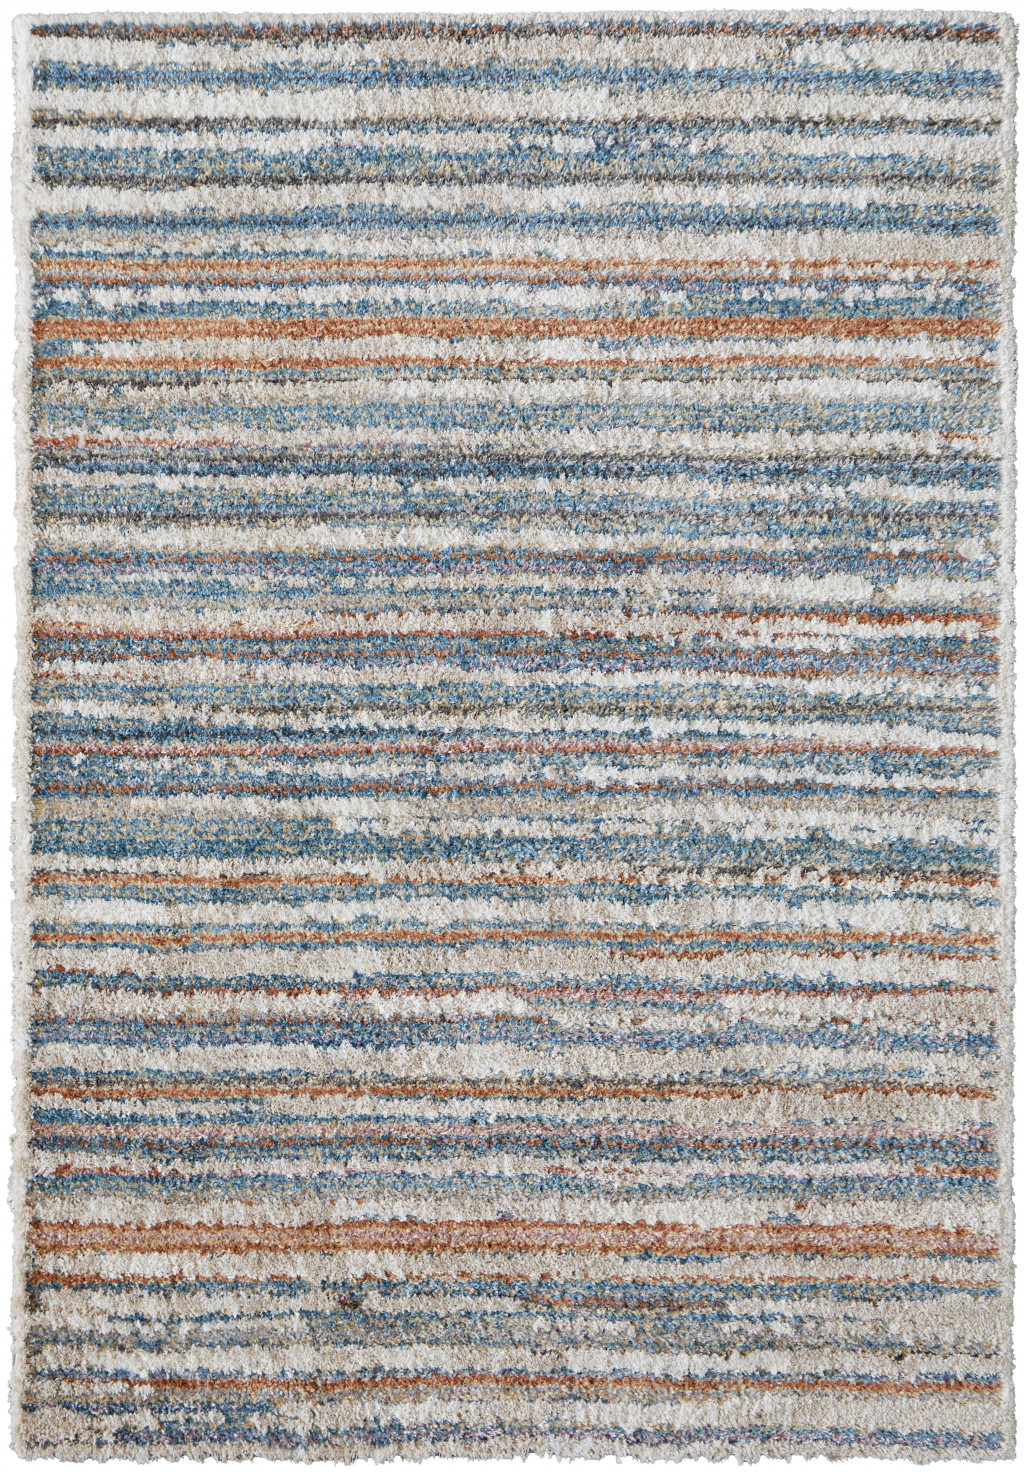 4' X 6' Ivory Blue And Orange Striped Power Loom Stain Resistant Area Rug-514527-1